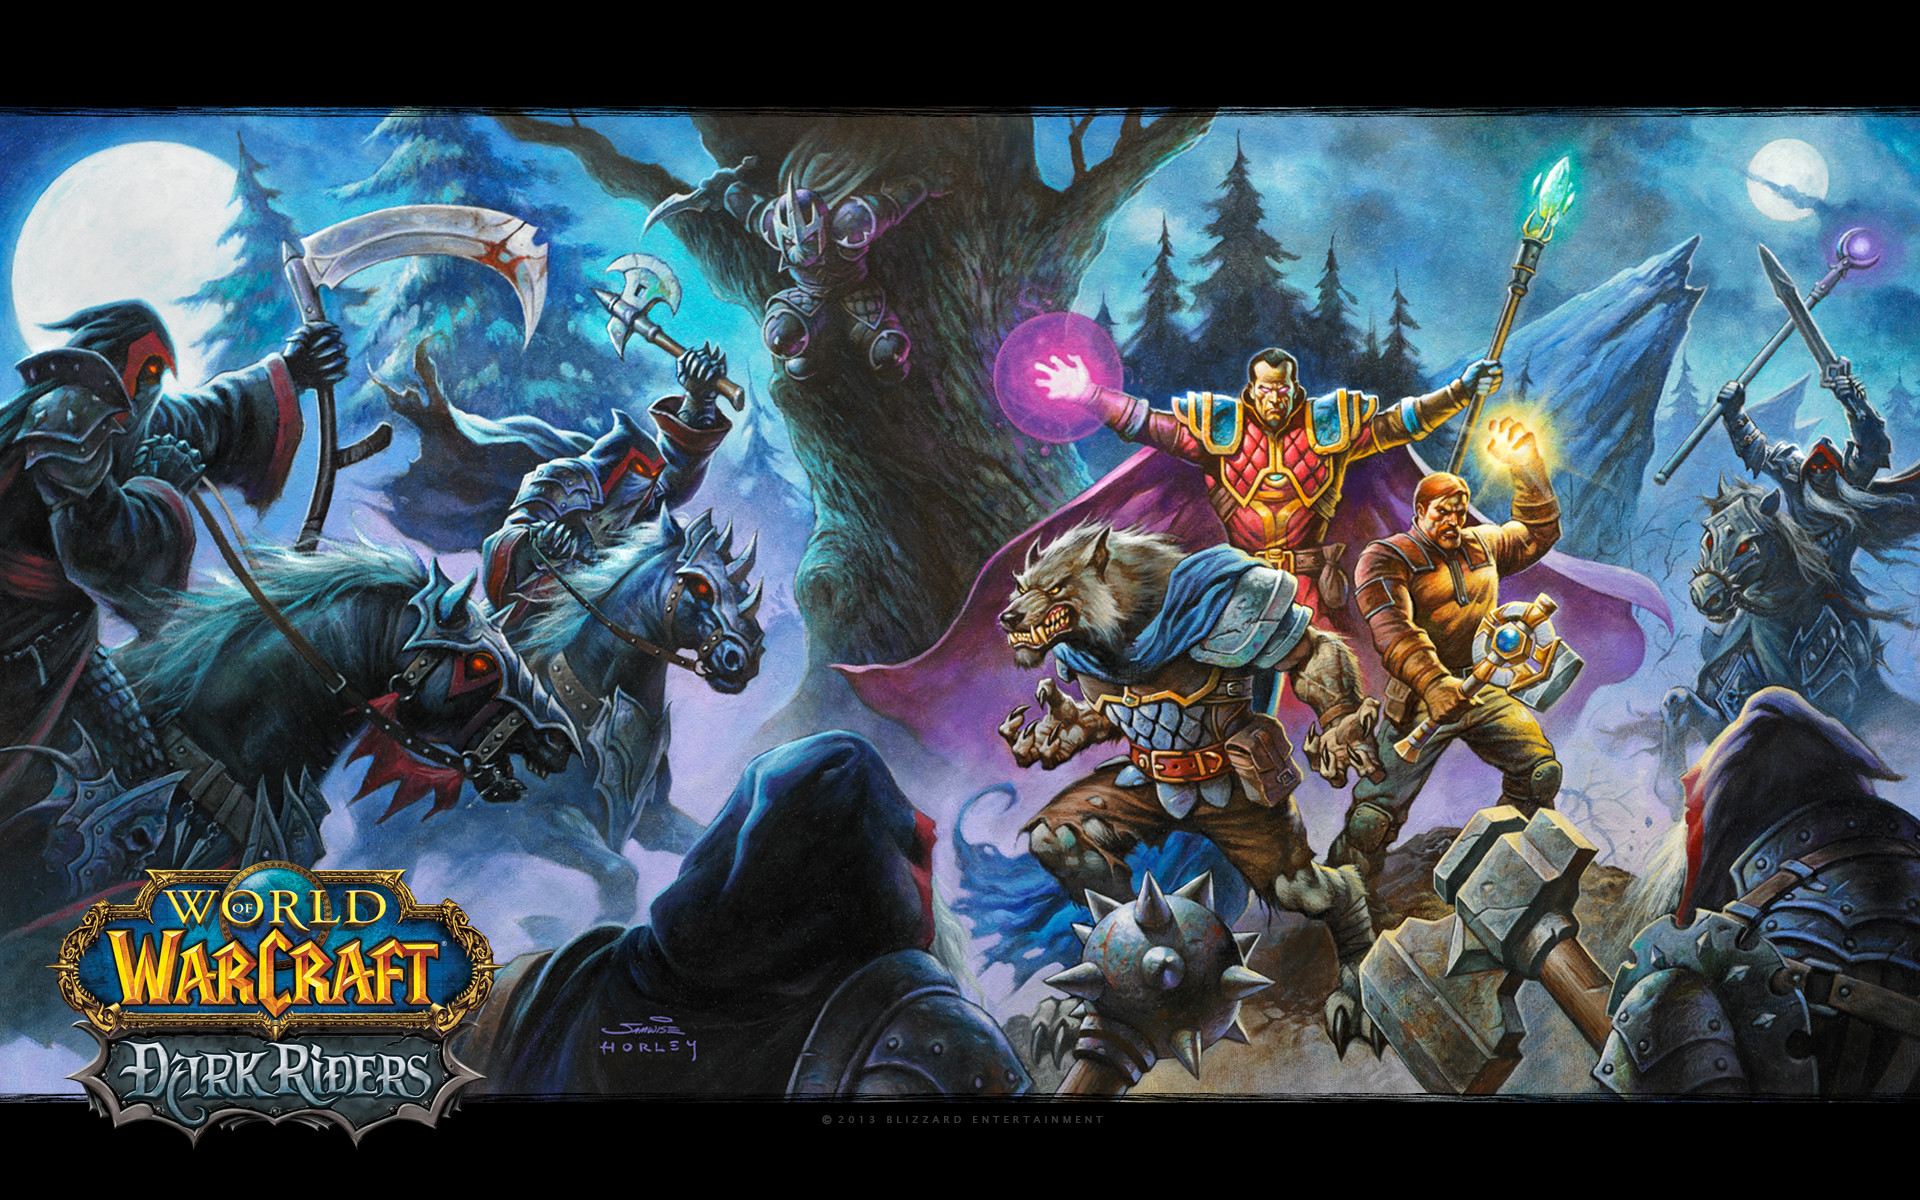 1920x1200 Blizzplanet The Official World of Warcraft: Dark Riders Wallpaper Available  | Blizzplanet